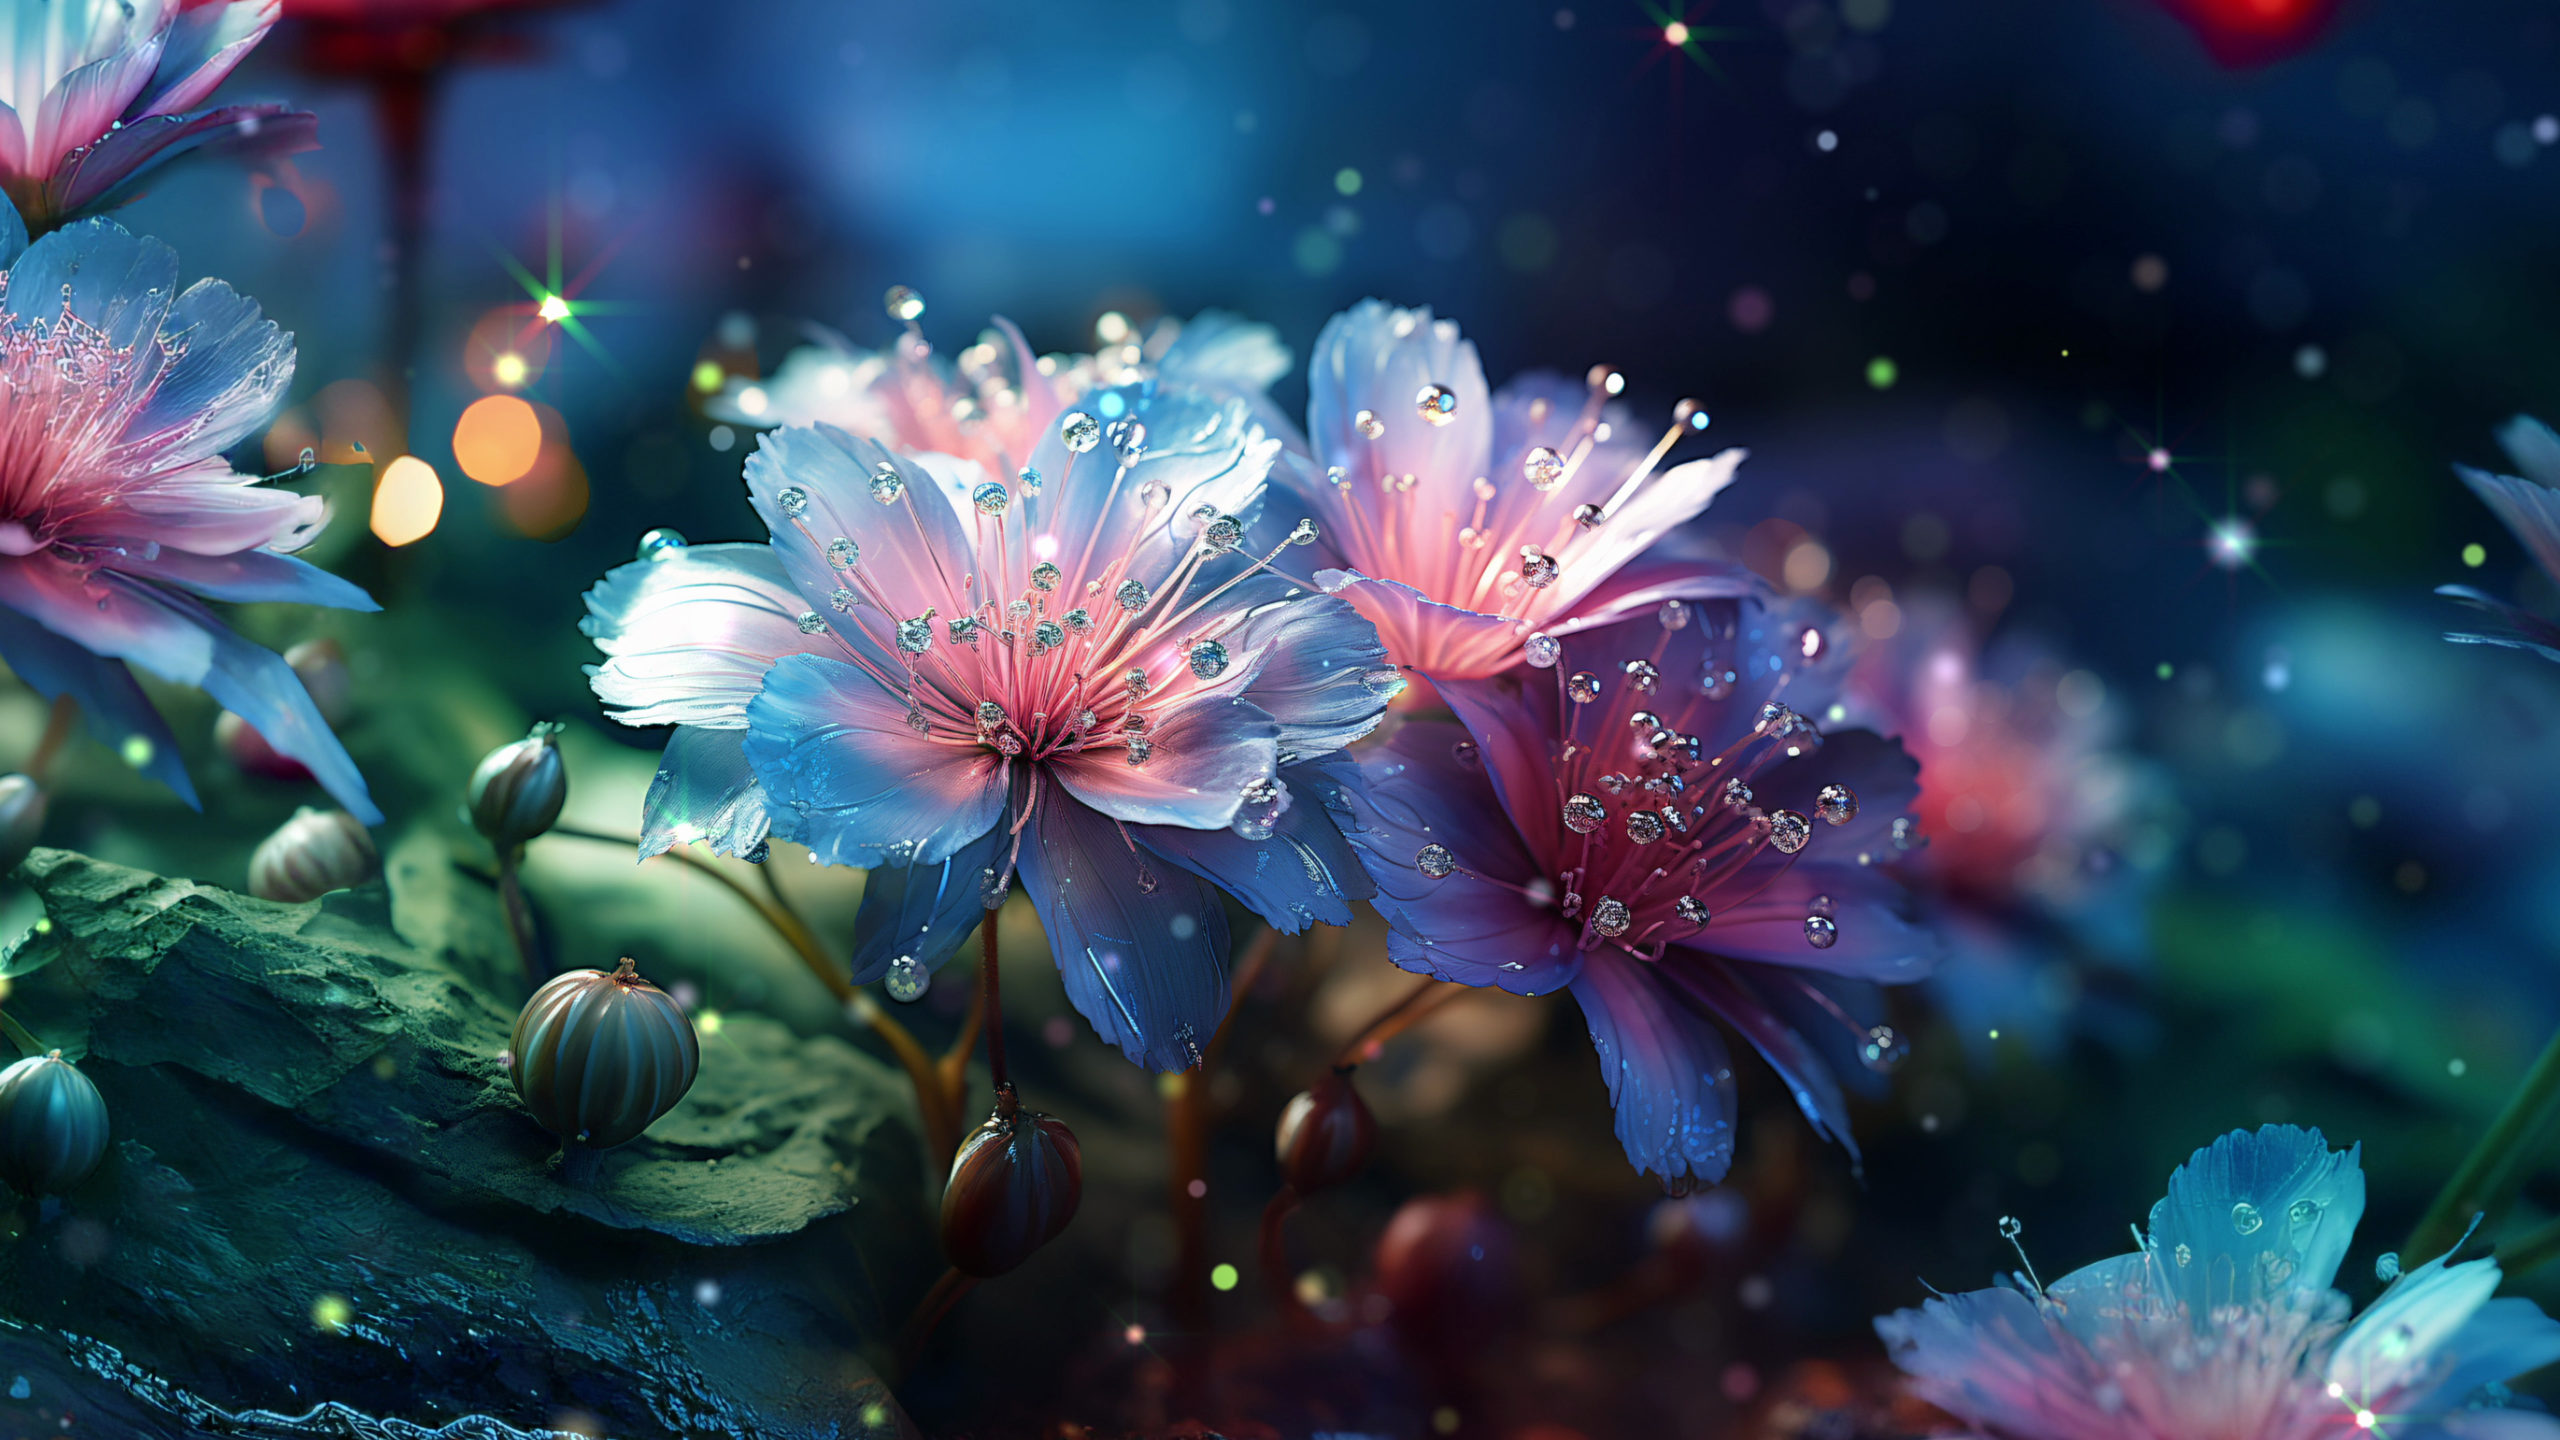 Flowers with Colorful Design  4k